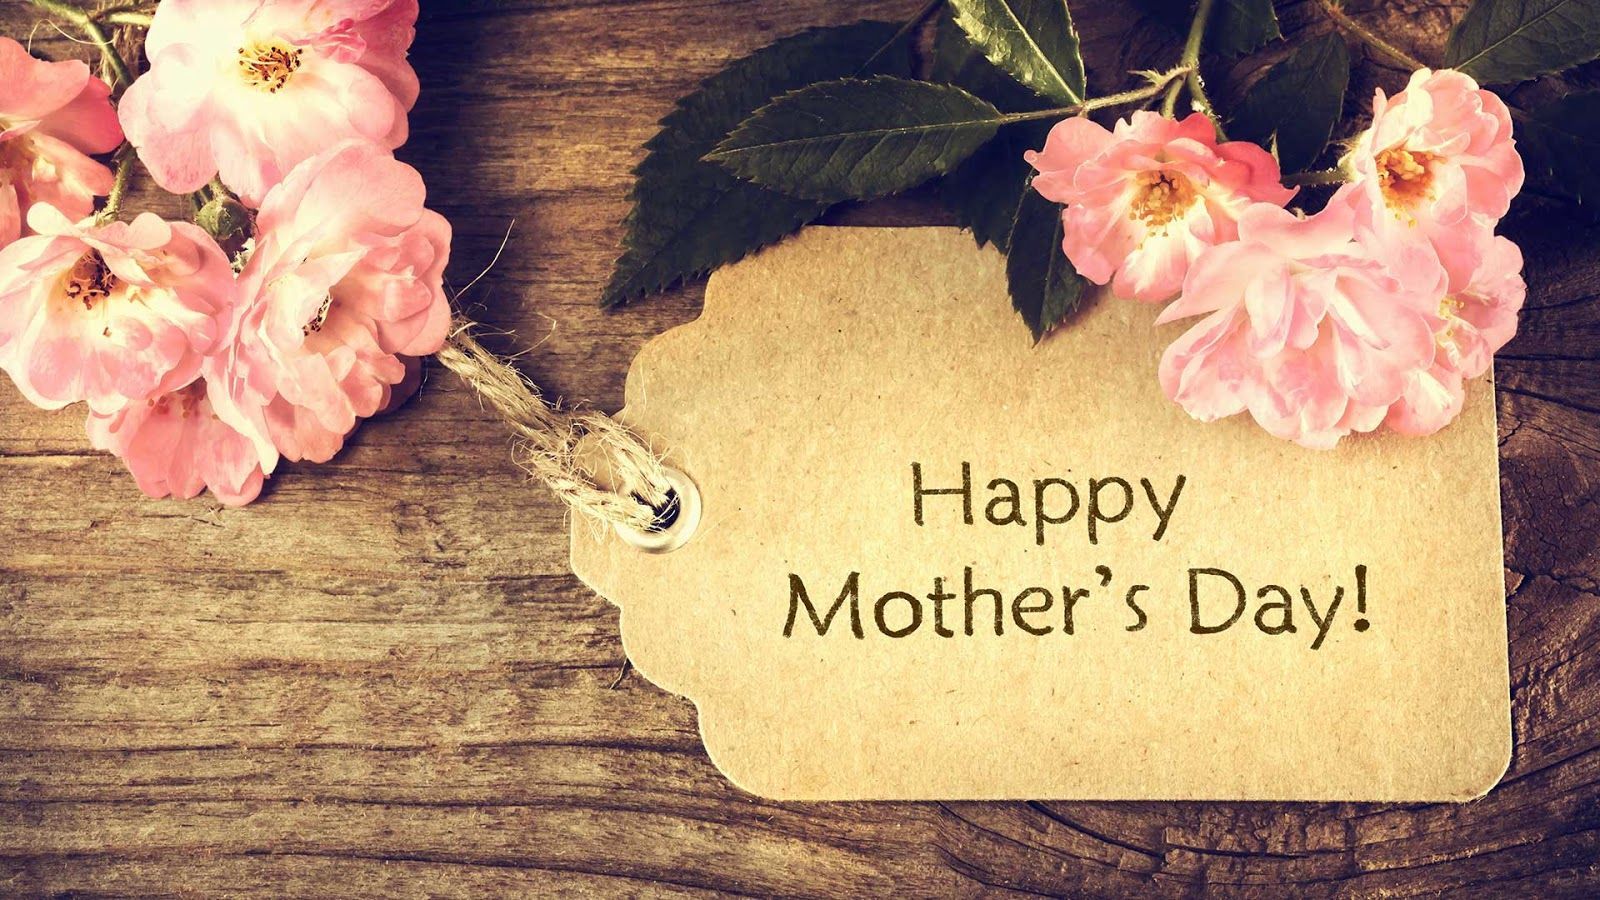 Mothers Day HD Wallpaper Free Download Bouquet For Retirement HD Wallpaper